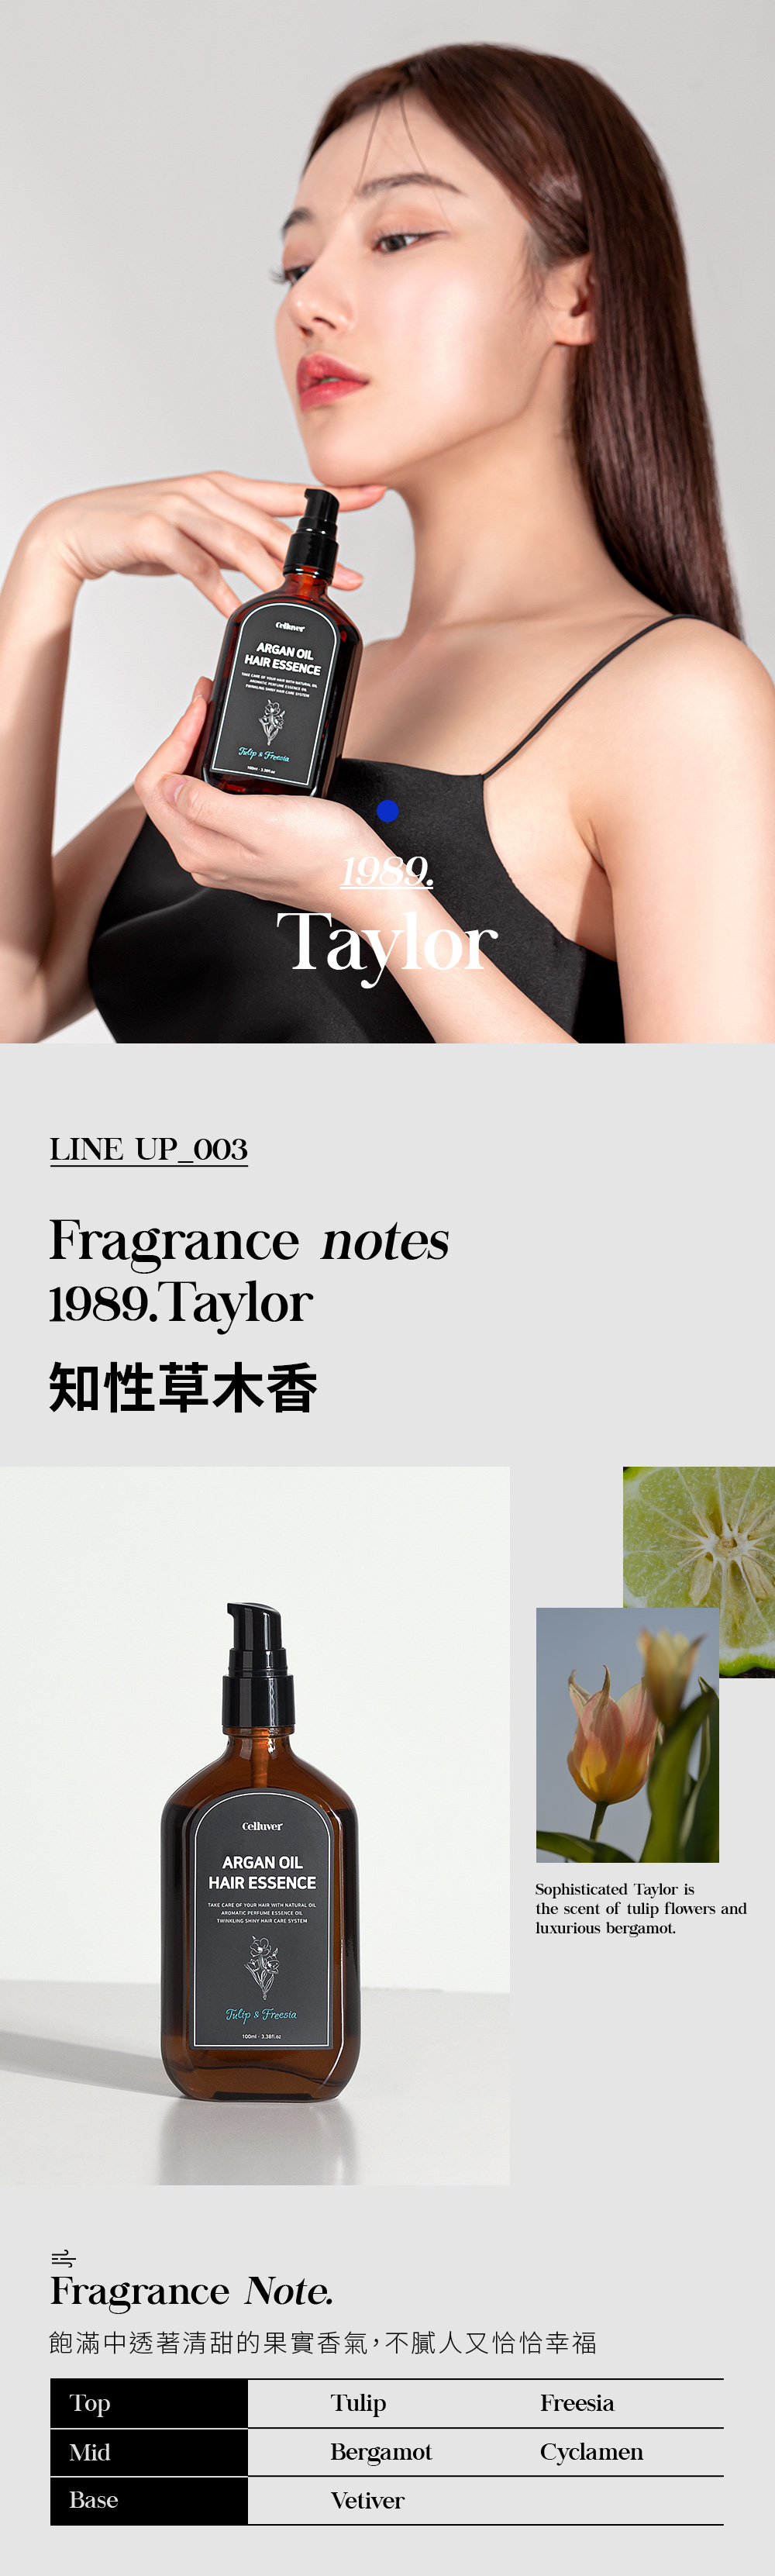 ARGAN HAIR ESSENCE        1989TaylorLINE Fragrance notes1989Taylor知性草木香CelluverARGAN OILHAIR ESSENCETAKE CARE OF YOUR HAIR WITH NATURAL OILAROMATIC PERFUME ESSENCE OILTWINKLING SHINY HAIR CARE SYSTEMSophisticated Taylor isthe scent of tulip flowers andluxurious bergamot. & Freesia Fragrance Note.飽滿中透著清甜的果實香氣,不膩人又恰恰幸福TopTulipFreesiaMidBergamotCyclamenBaseVetiver